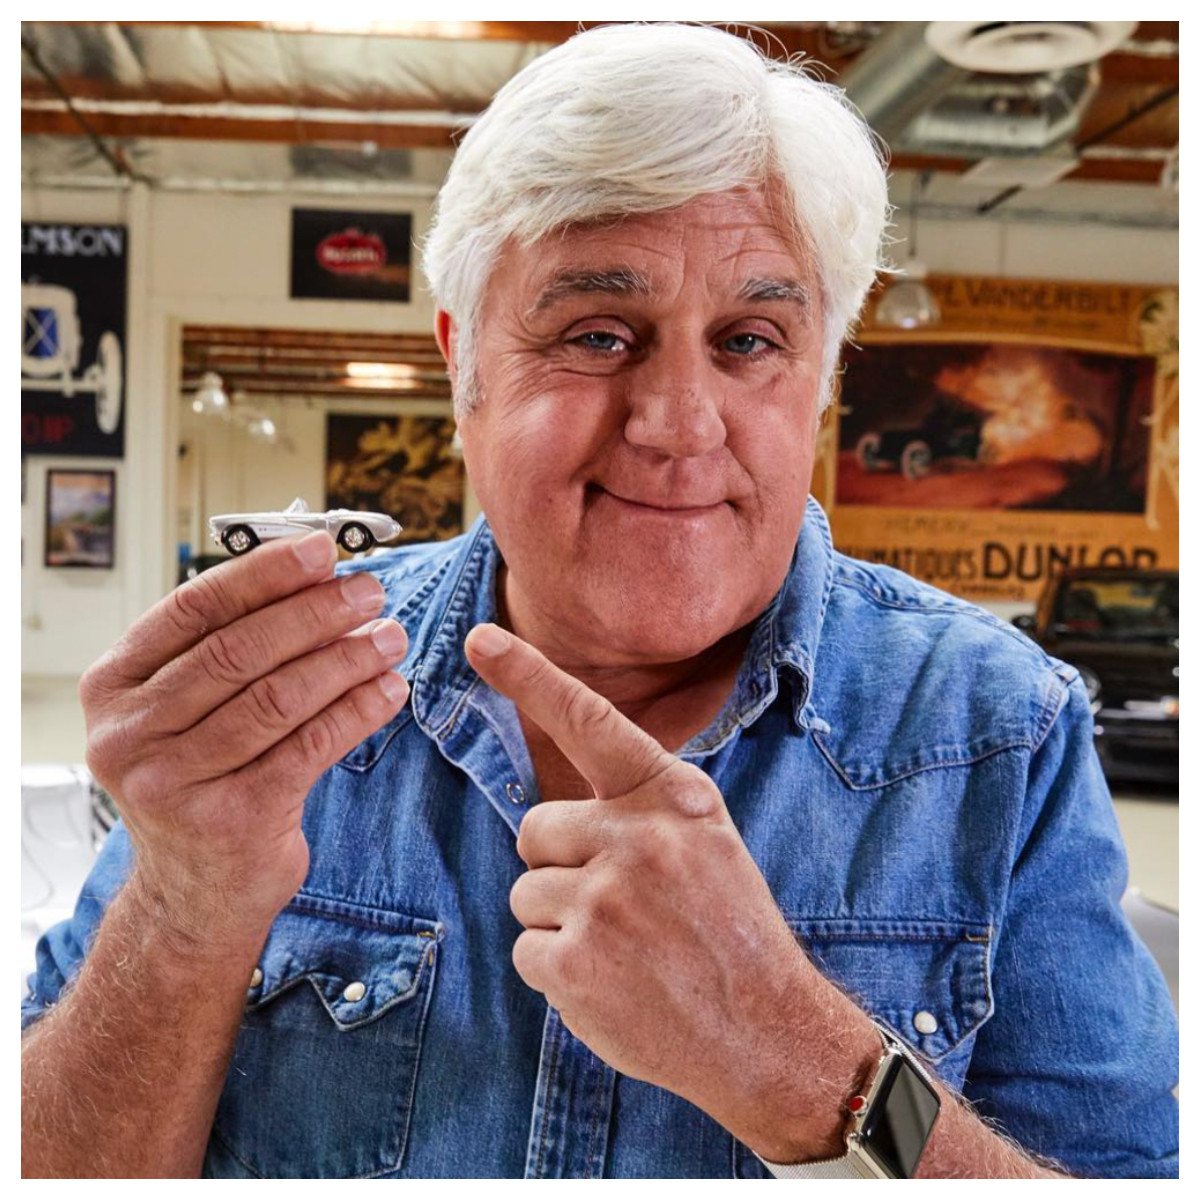 Jay Leno’s passion is for cars with a story to tell. Photo: @ jaylenosgarage/Instagram